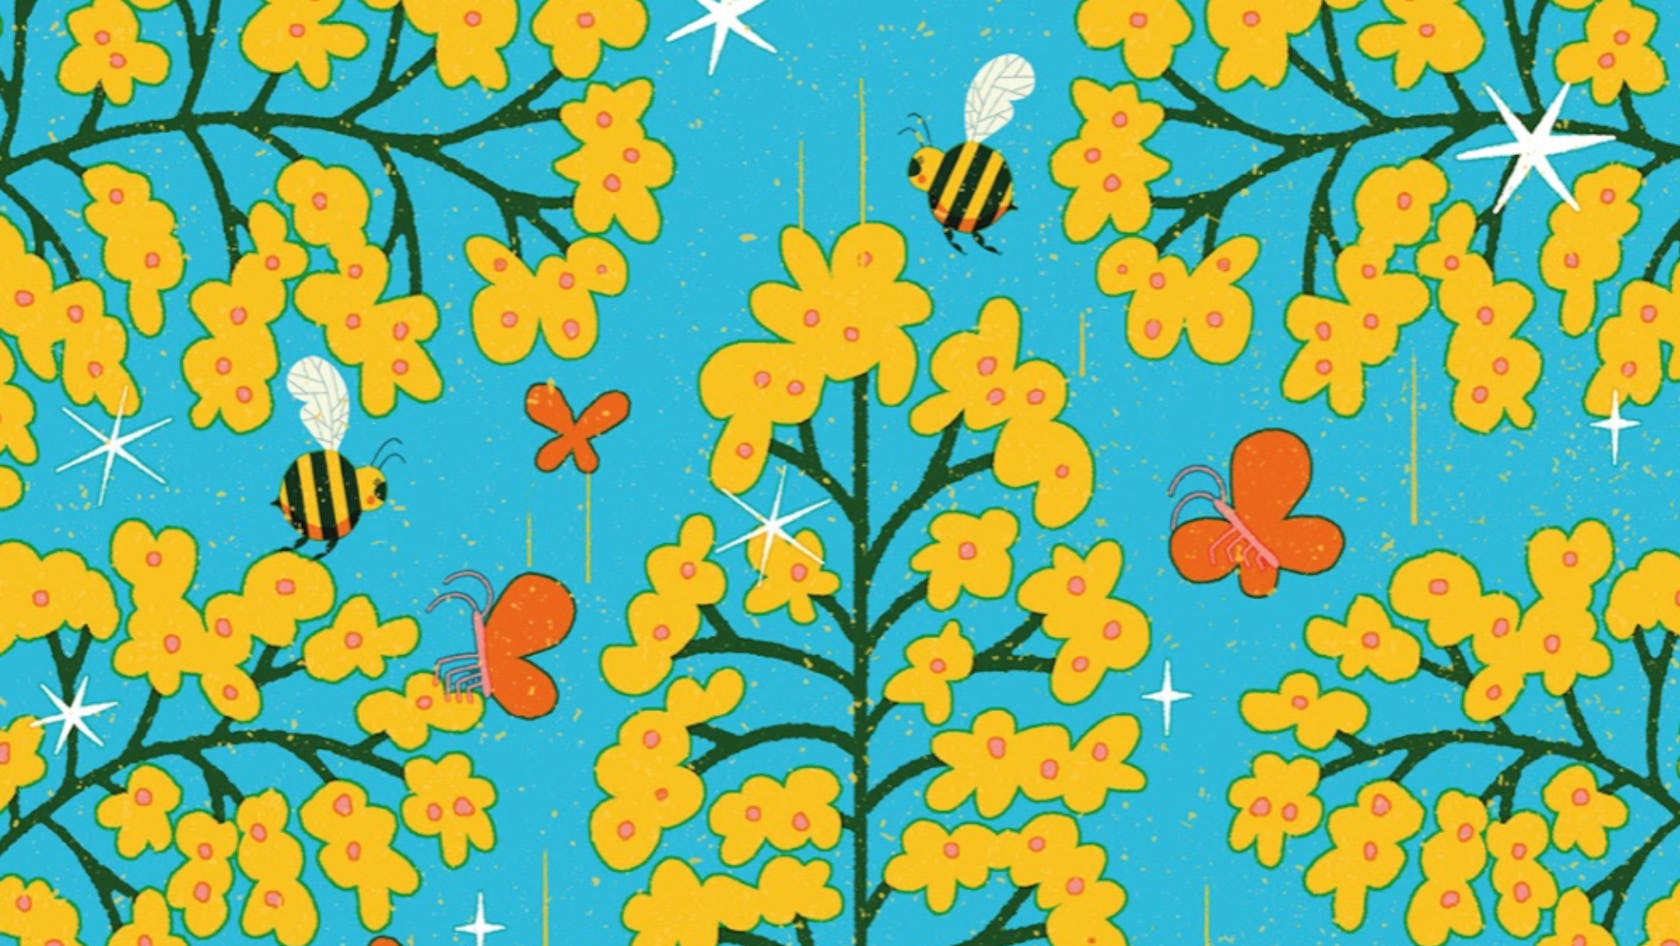 Illustration of goldenrod flowers with butterflies and bees flying around them